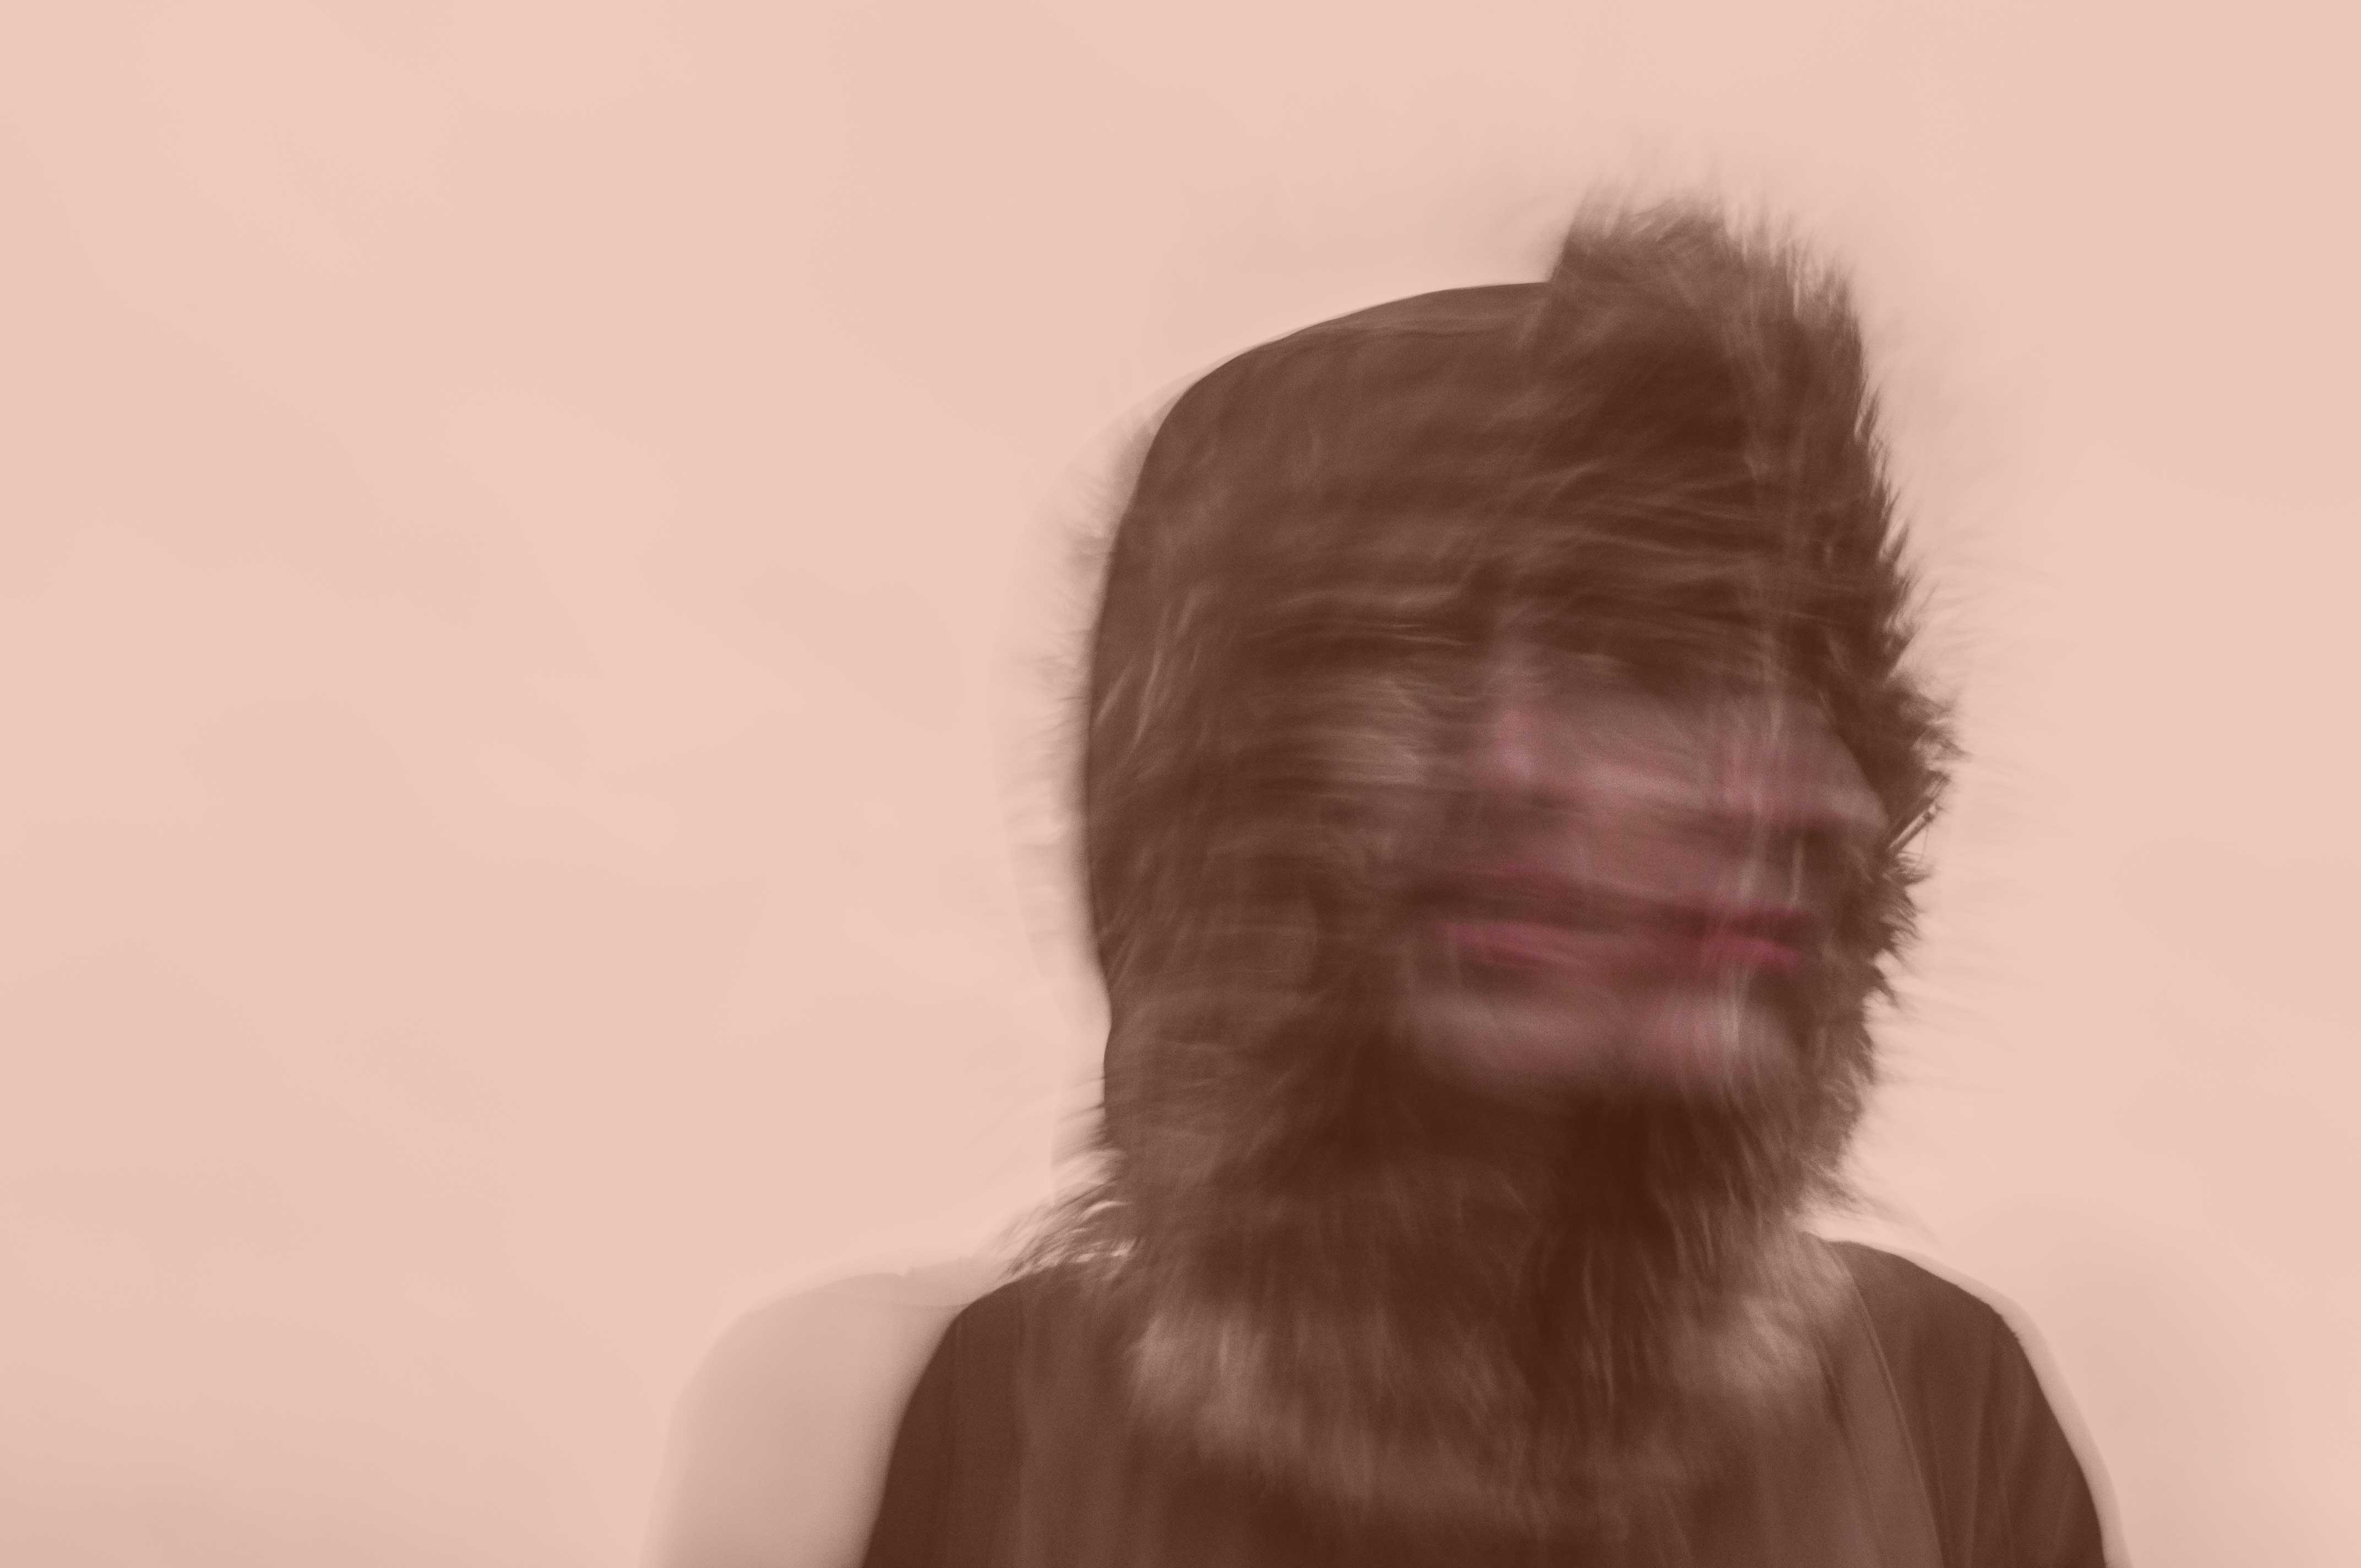 A blurred exposure of a person under a hood turning their head to the side.